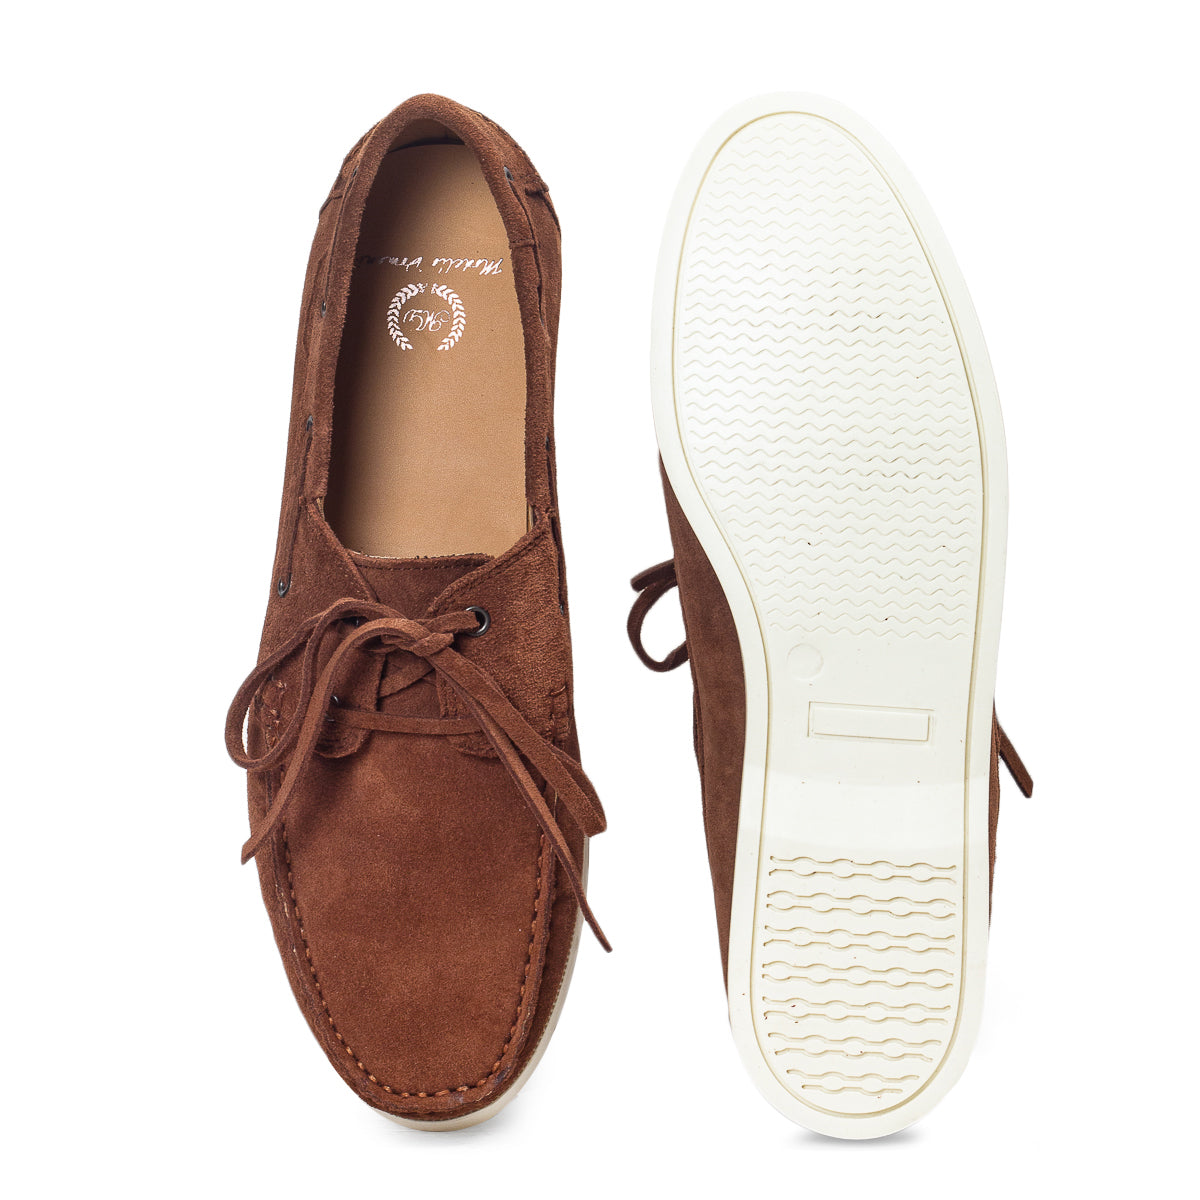 Lucia Boat Shoes (Brown - Limited Edition)